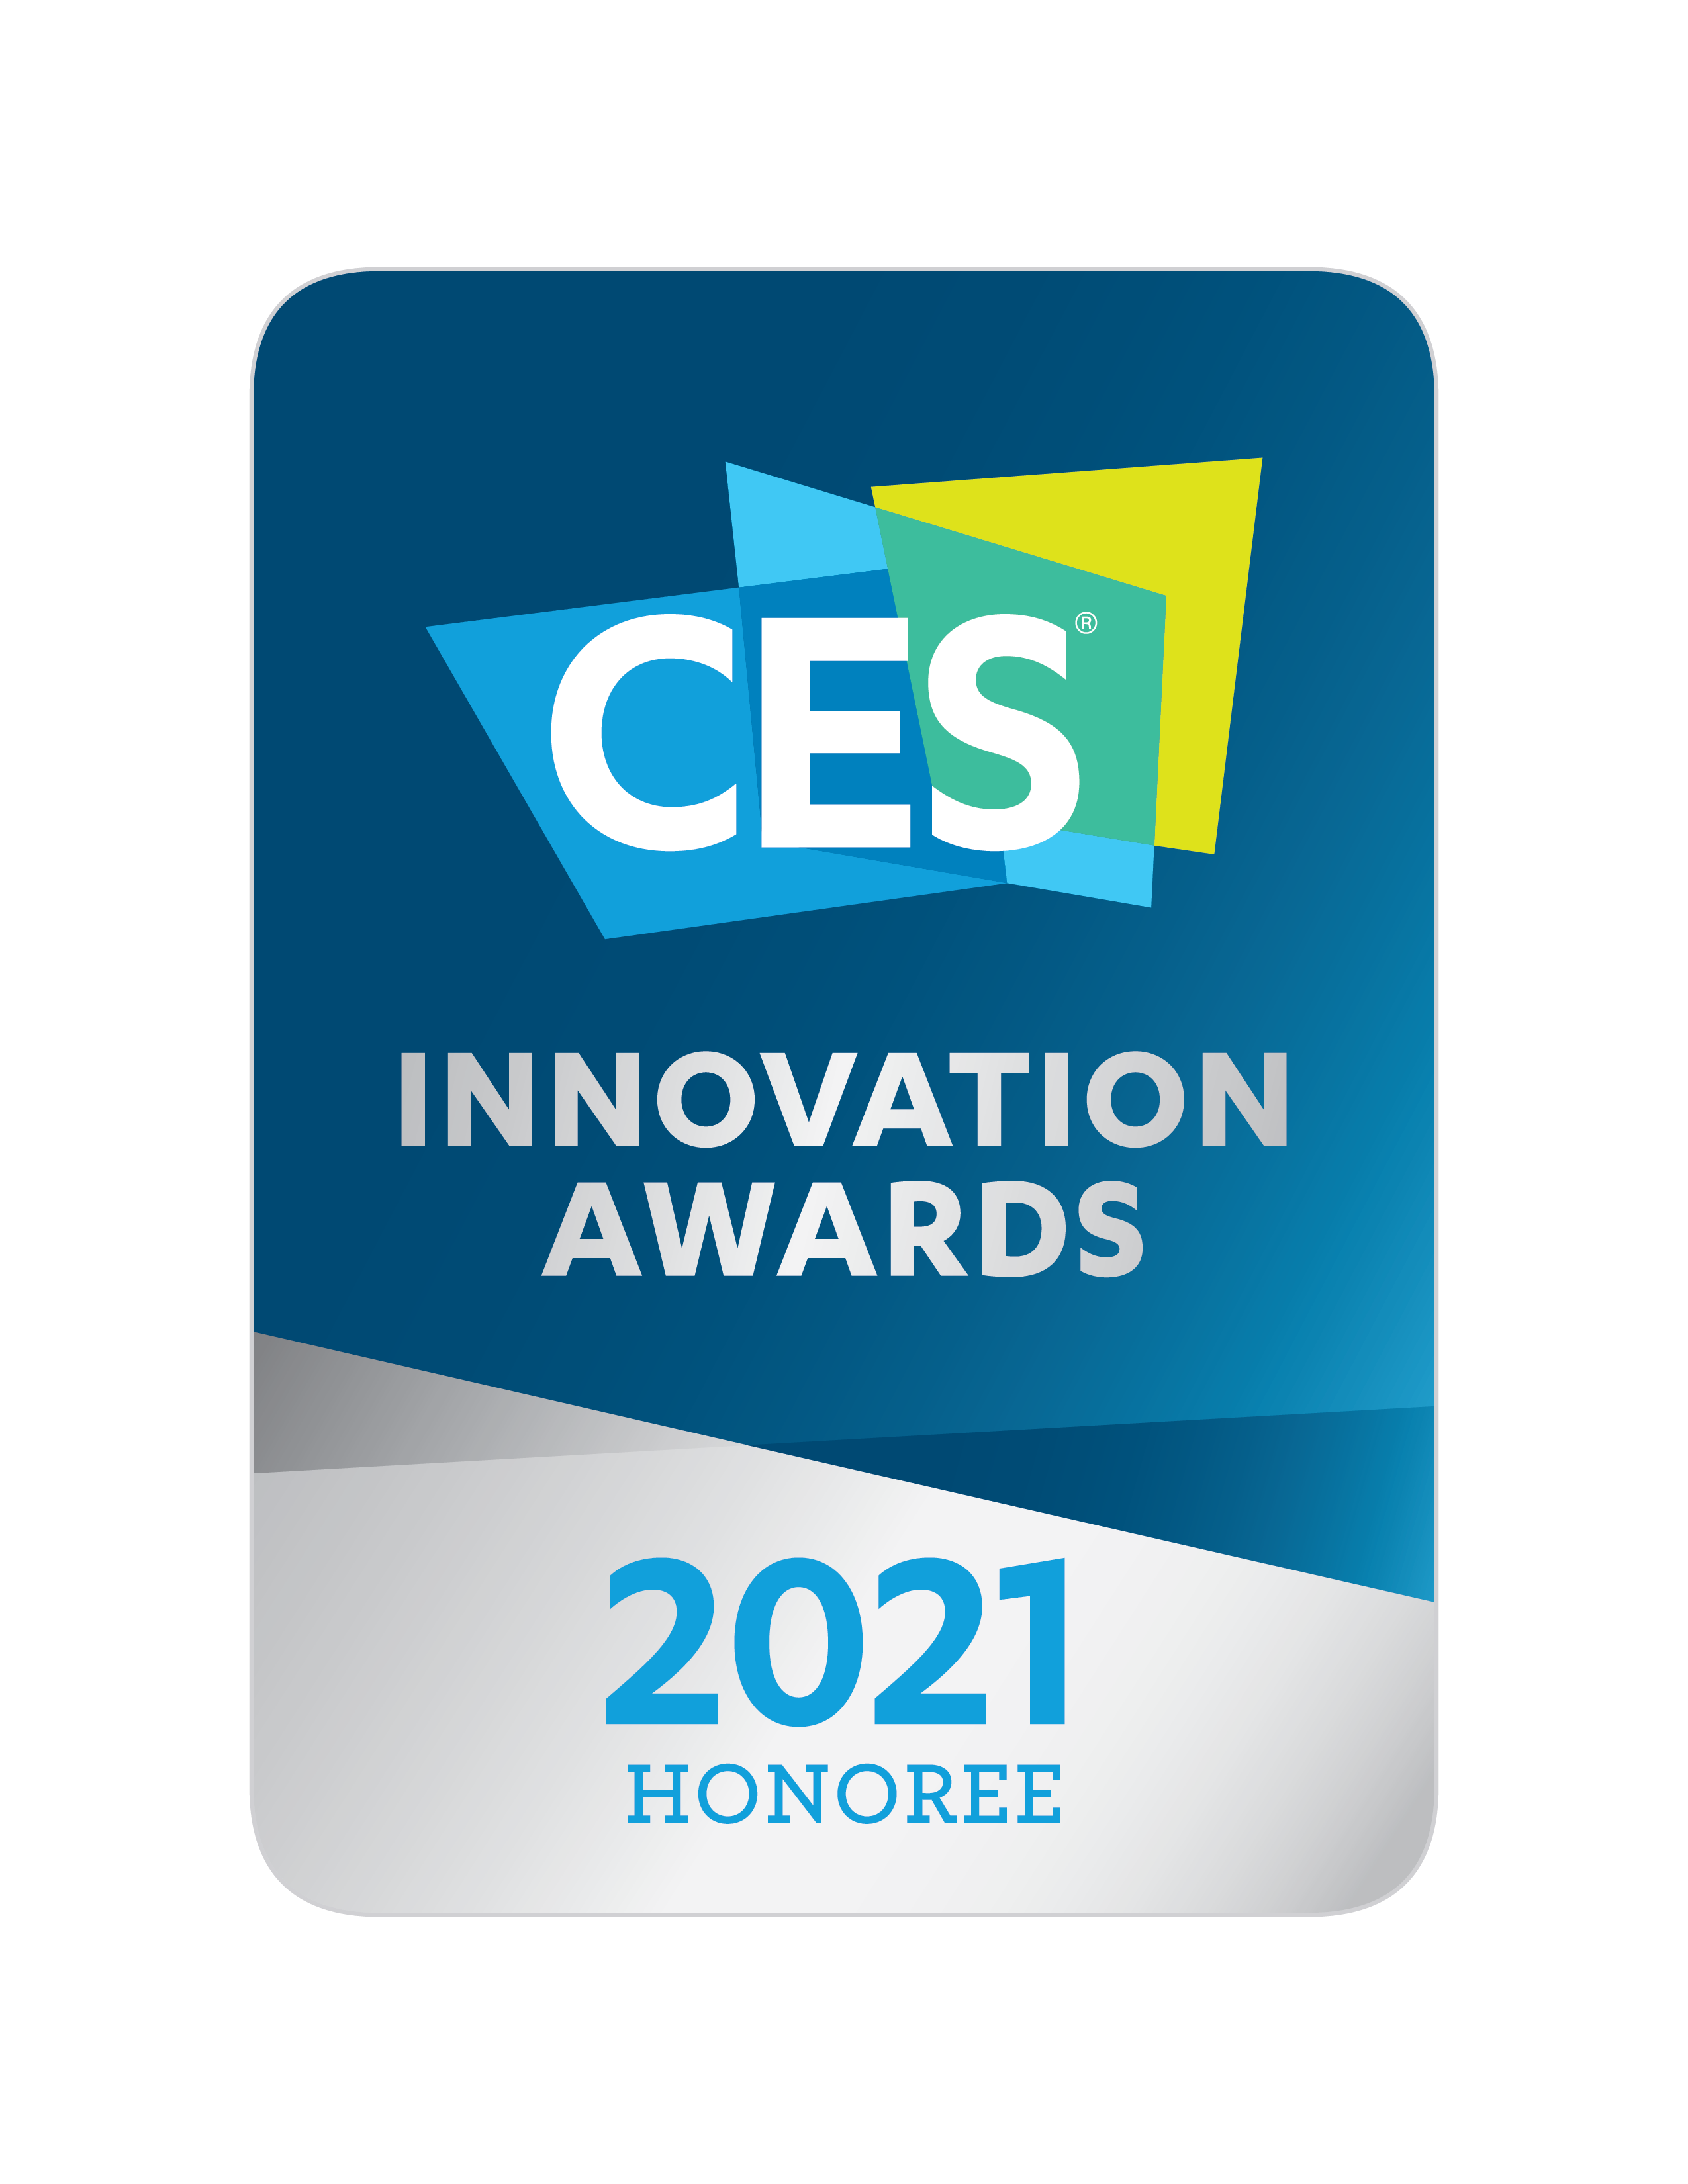 SCHOOL+ WINS CES INNOVATION HONOREE AWARDS